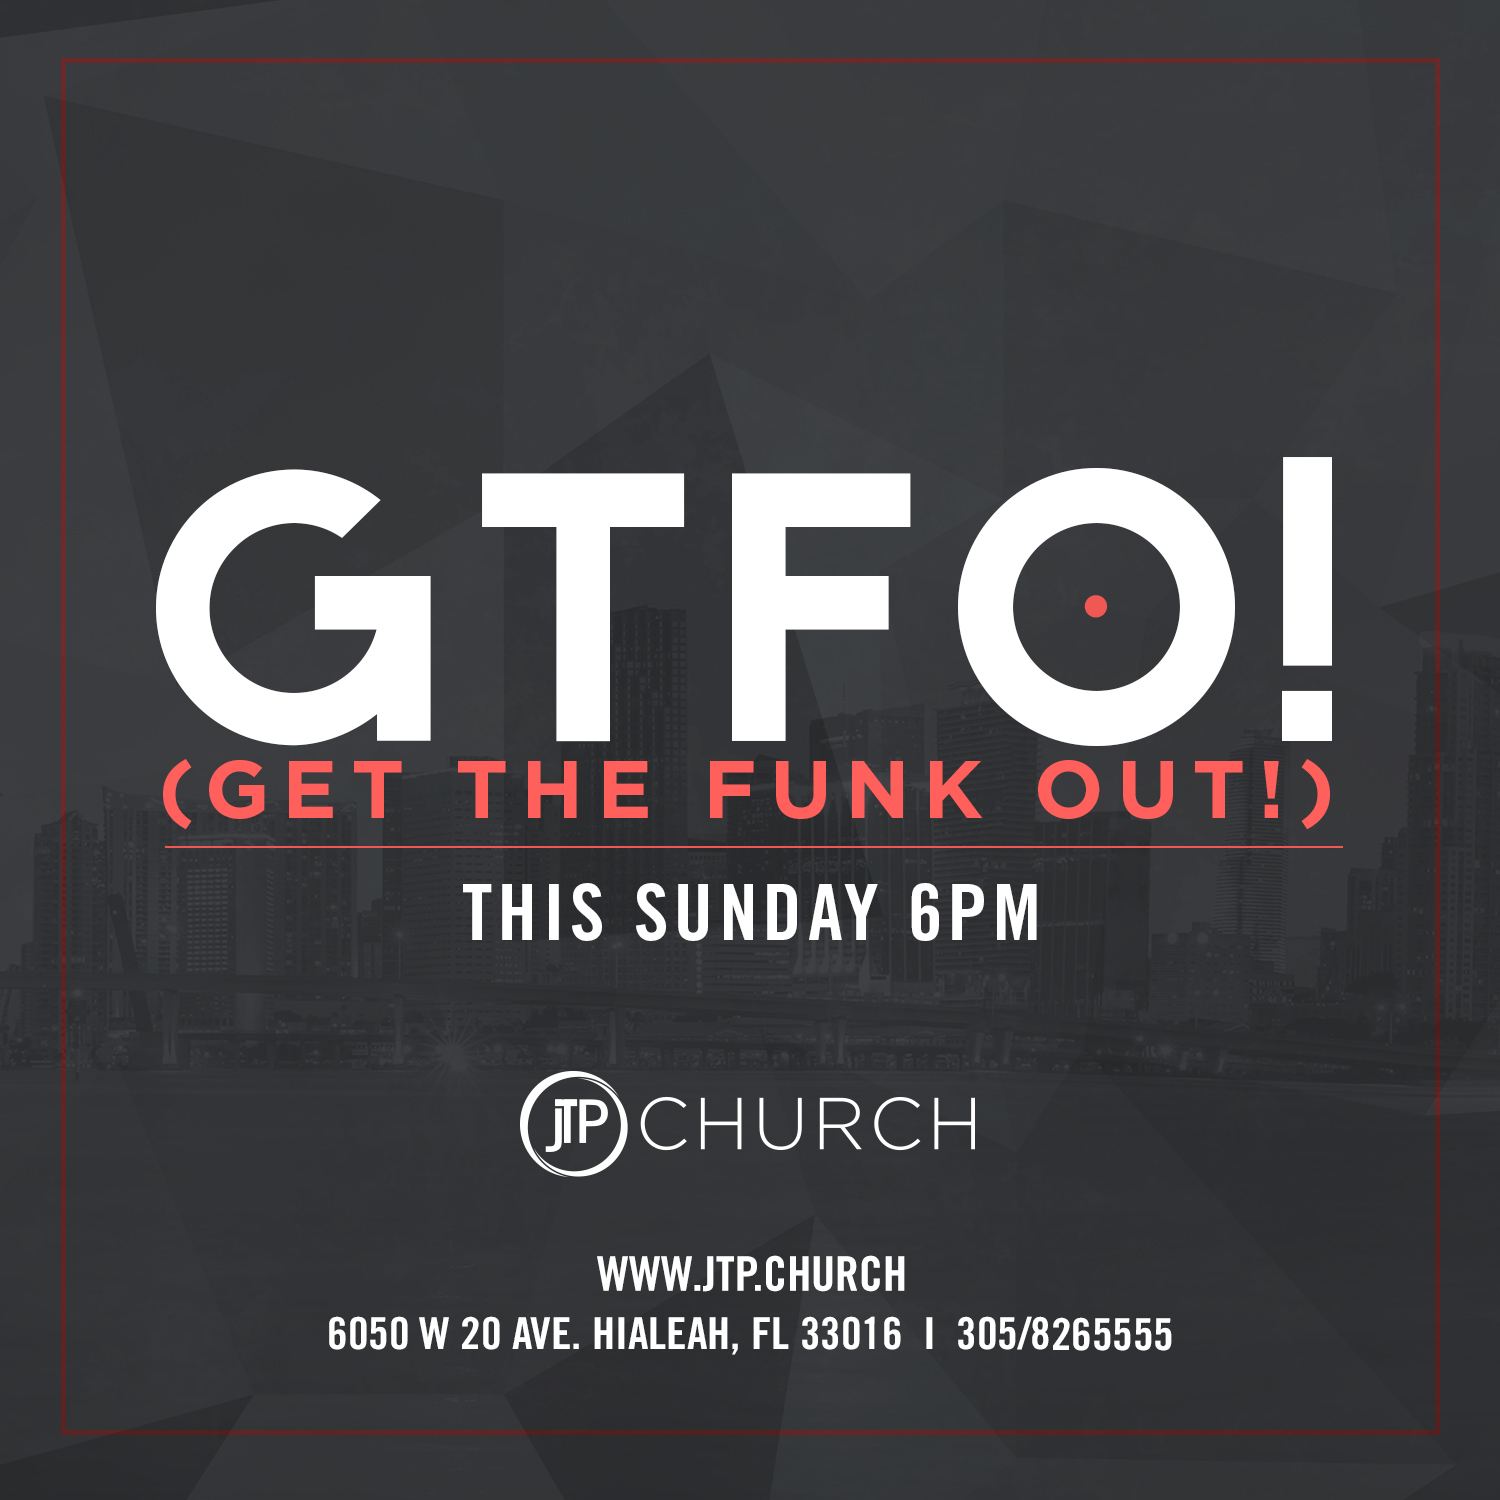 #gtfo (Get The Funk Out!)